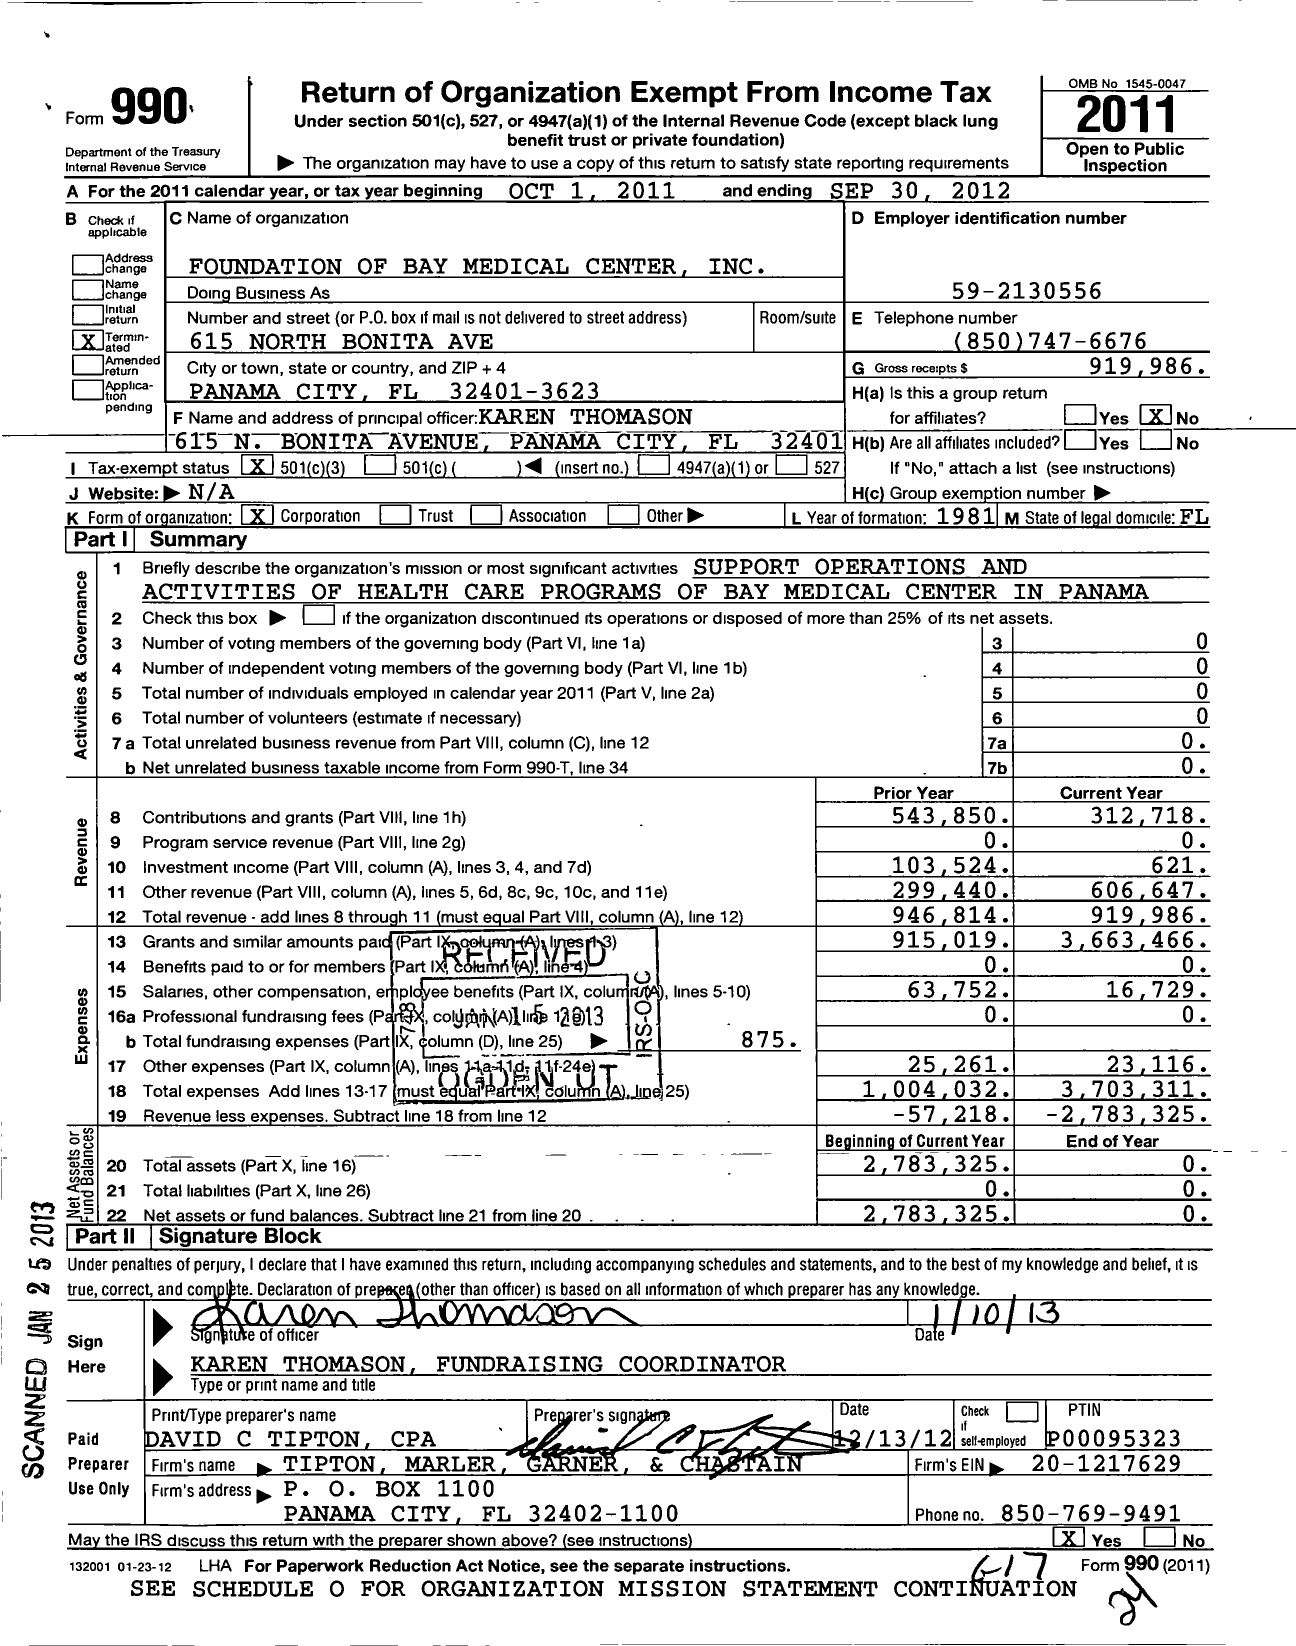 Image of first page of 2011 Form 990 for Foundation of Bay Medical Center